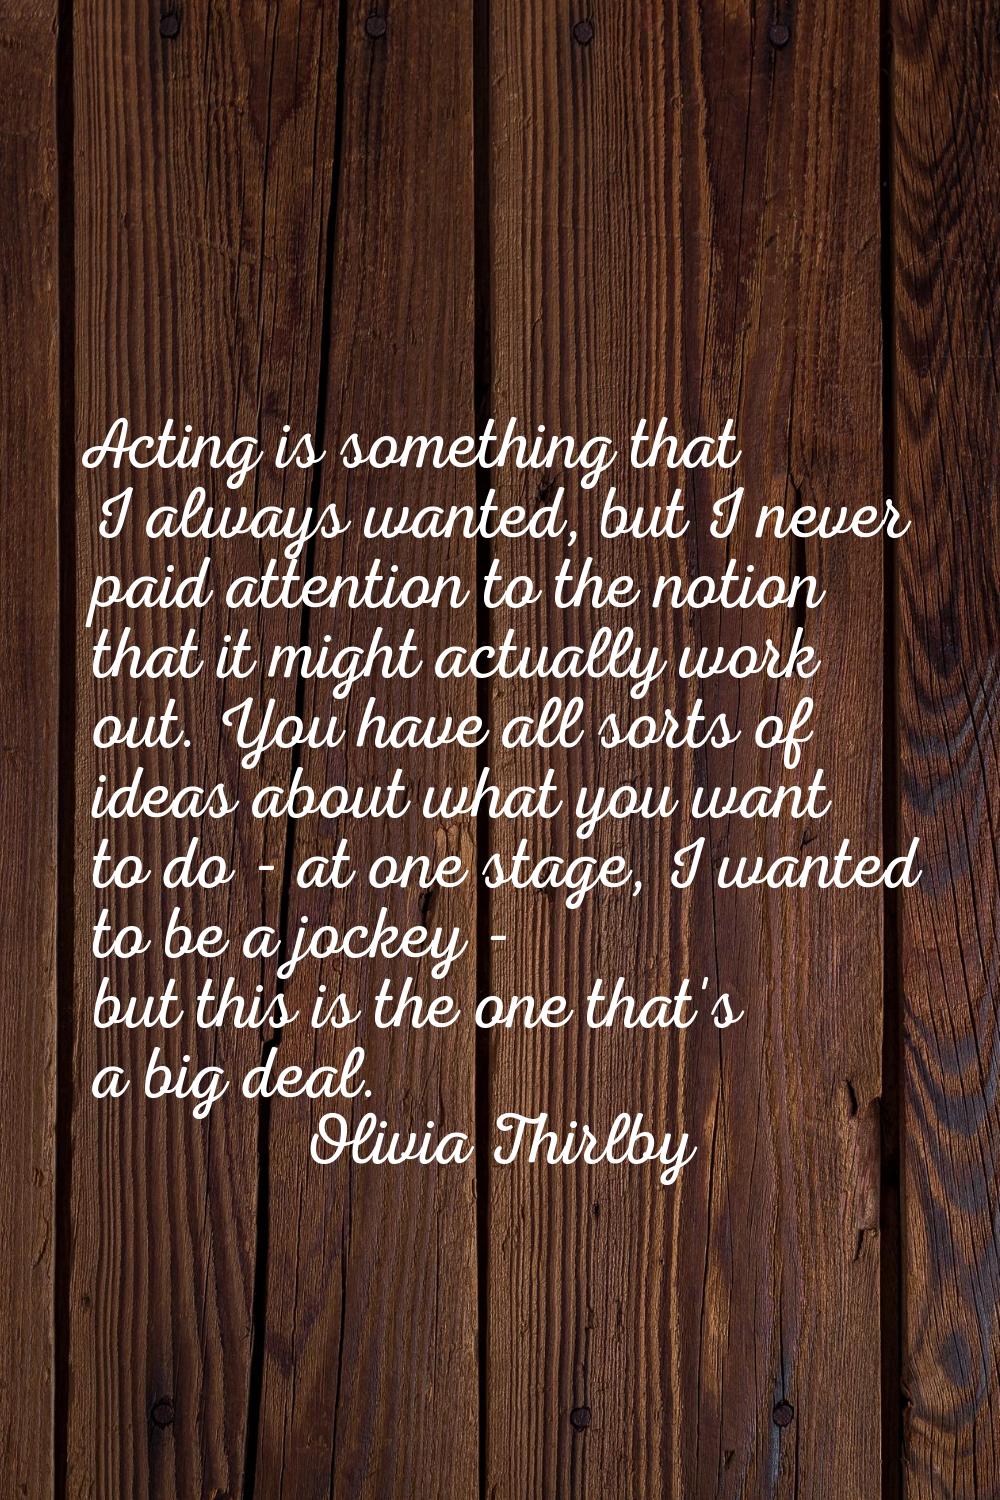 Acting is something that I always wanted, but I never paid attention to the notion that it might ac